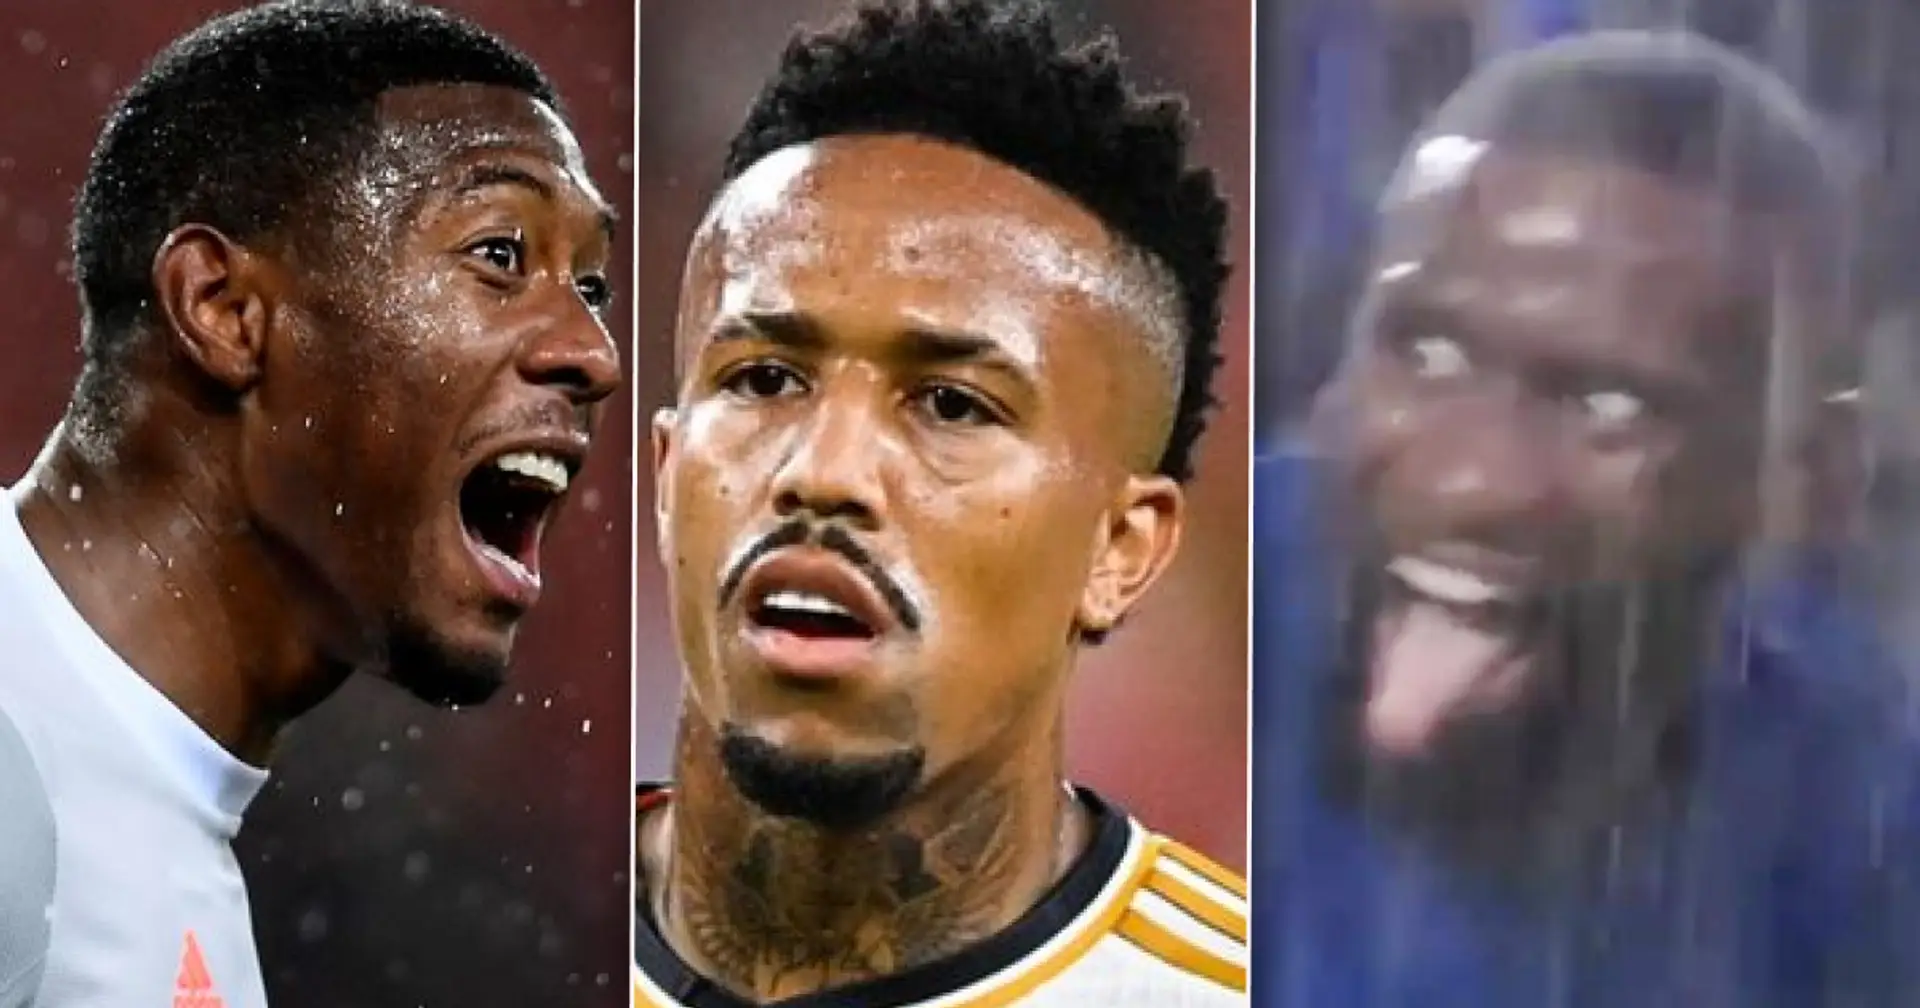 Who will you bench when Militao returns: Alaba or Rudiger? 